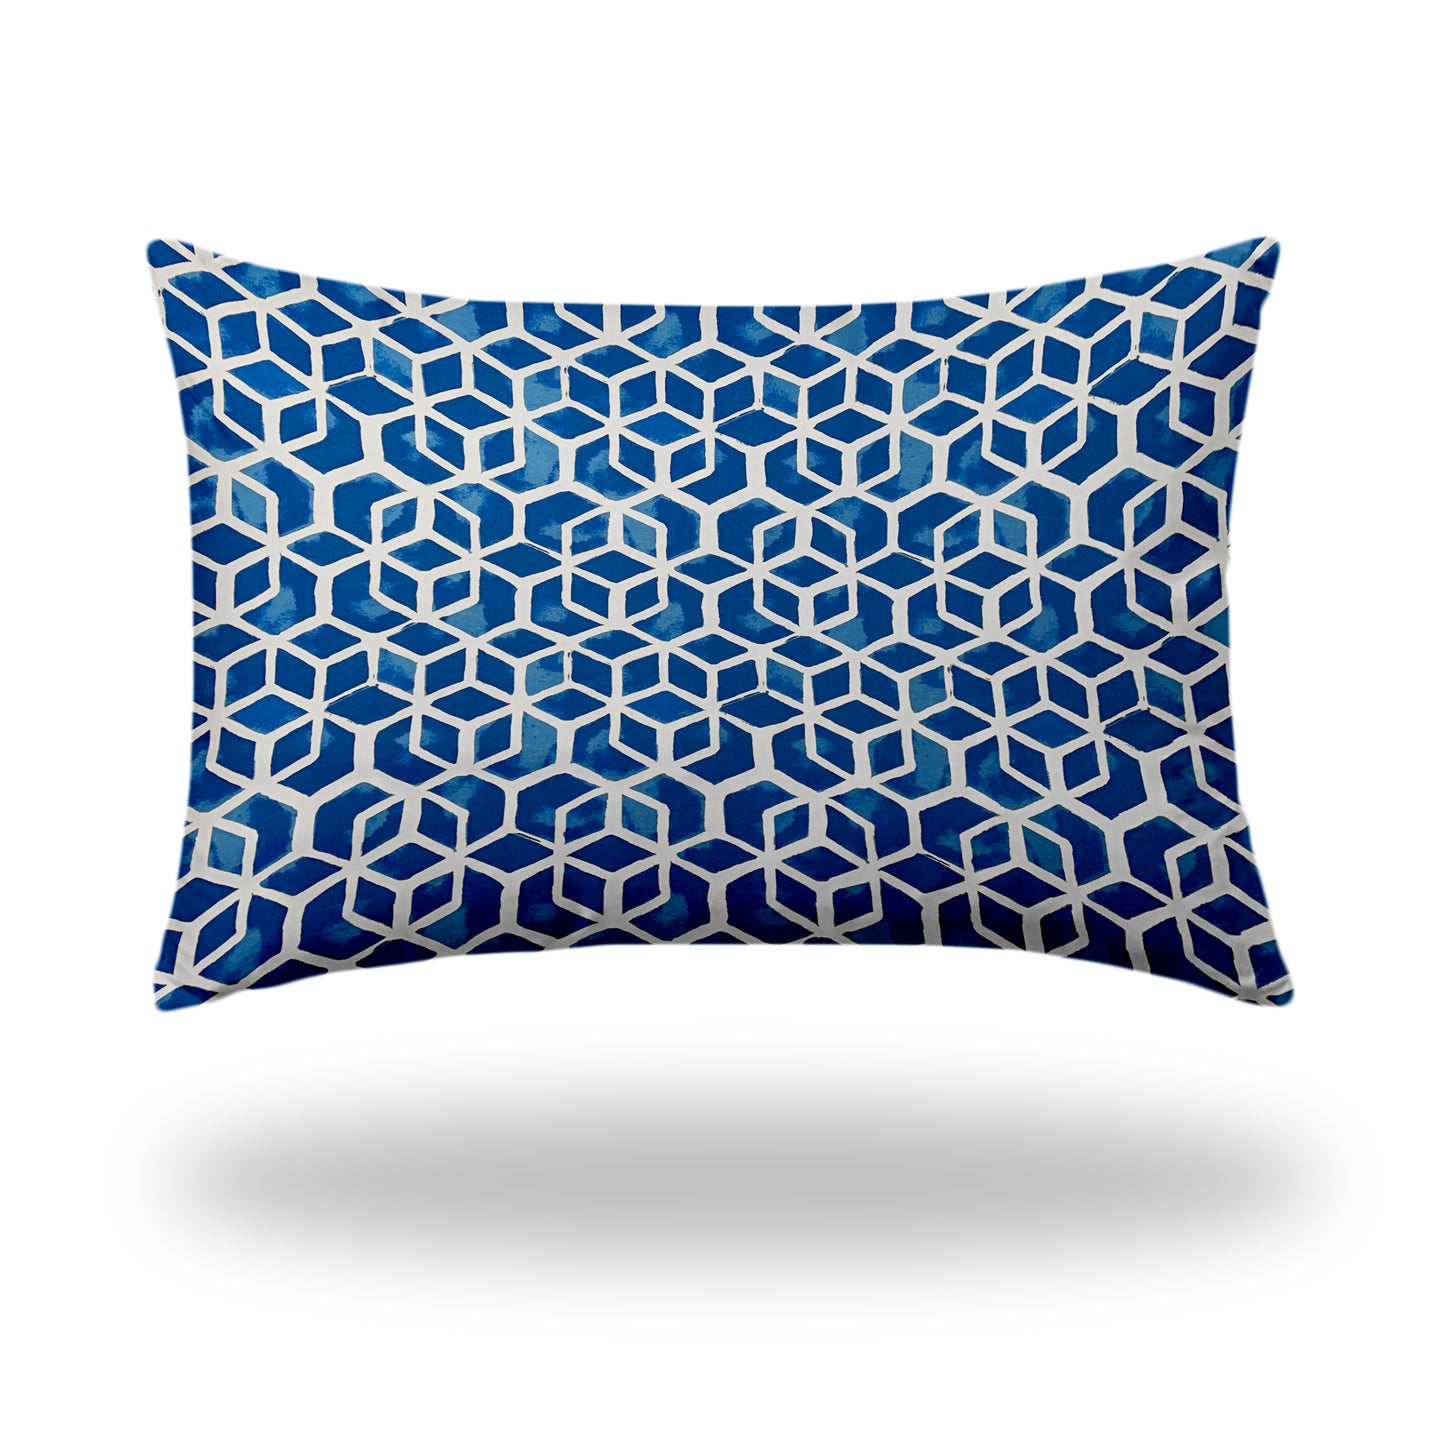 CUBE Indoor/Outdoor Soft Royal Pillow, Envelope Cover with Insert, 24x36